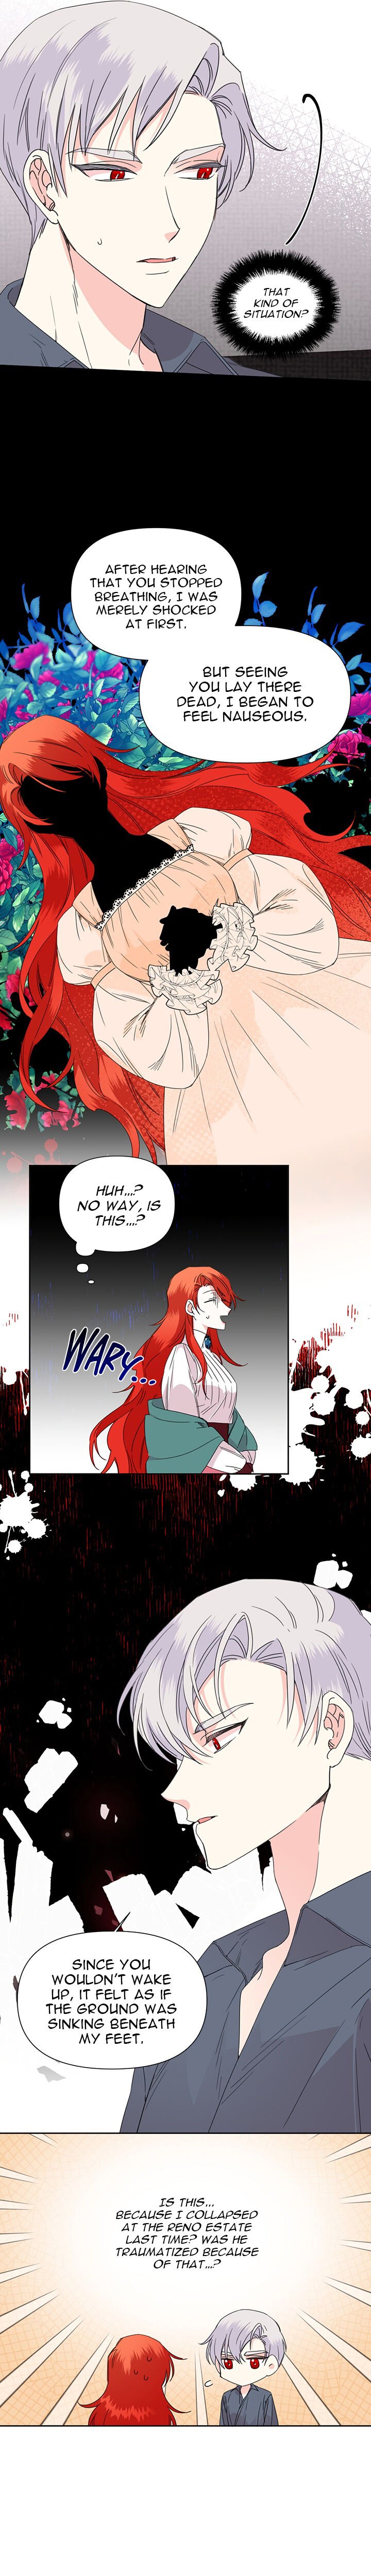 happy-ending-for-the-time-limited-villainess-chap-38-3